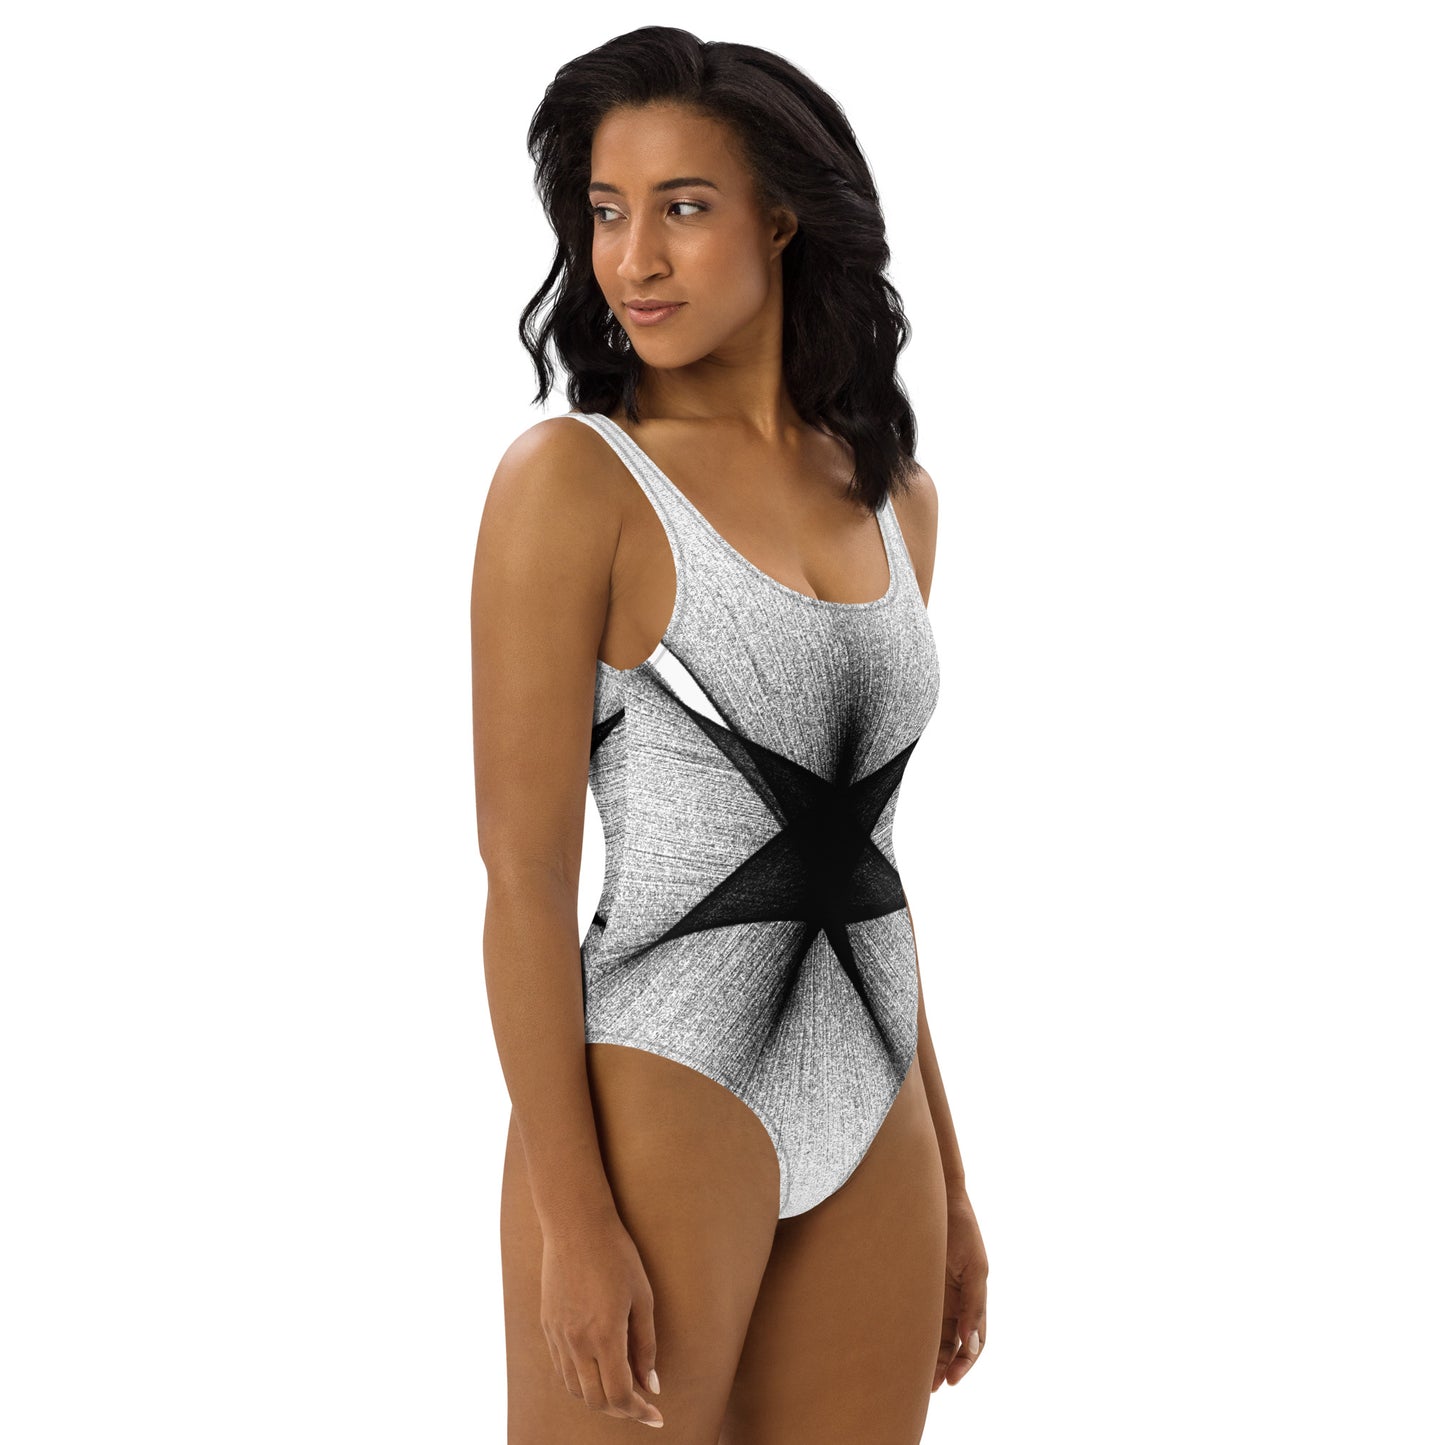 Stand Out on the Beach with Our Customized One-Piece Swimsuit!